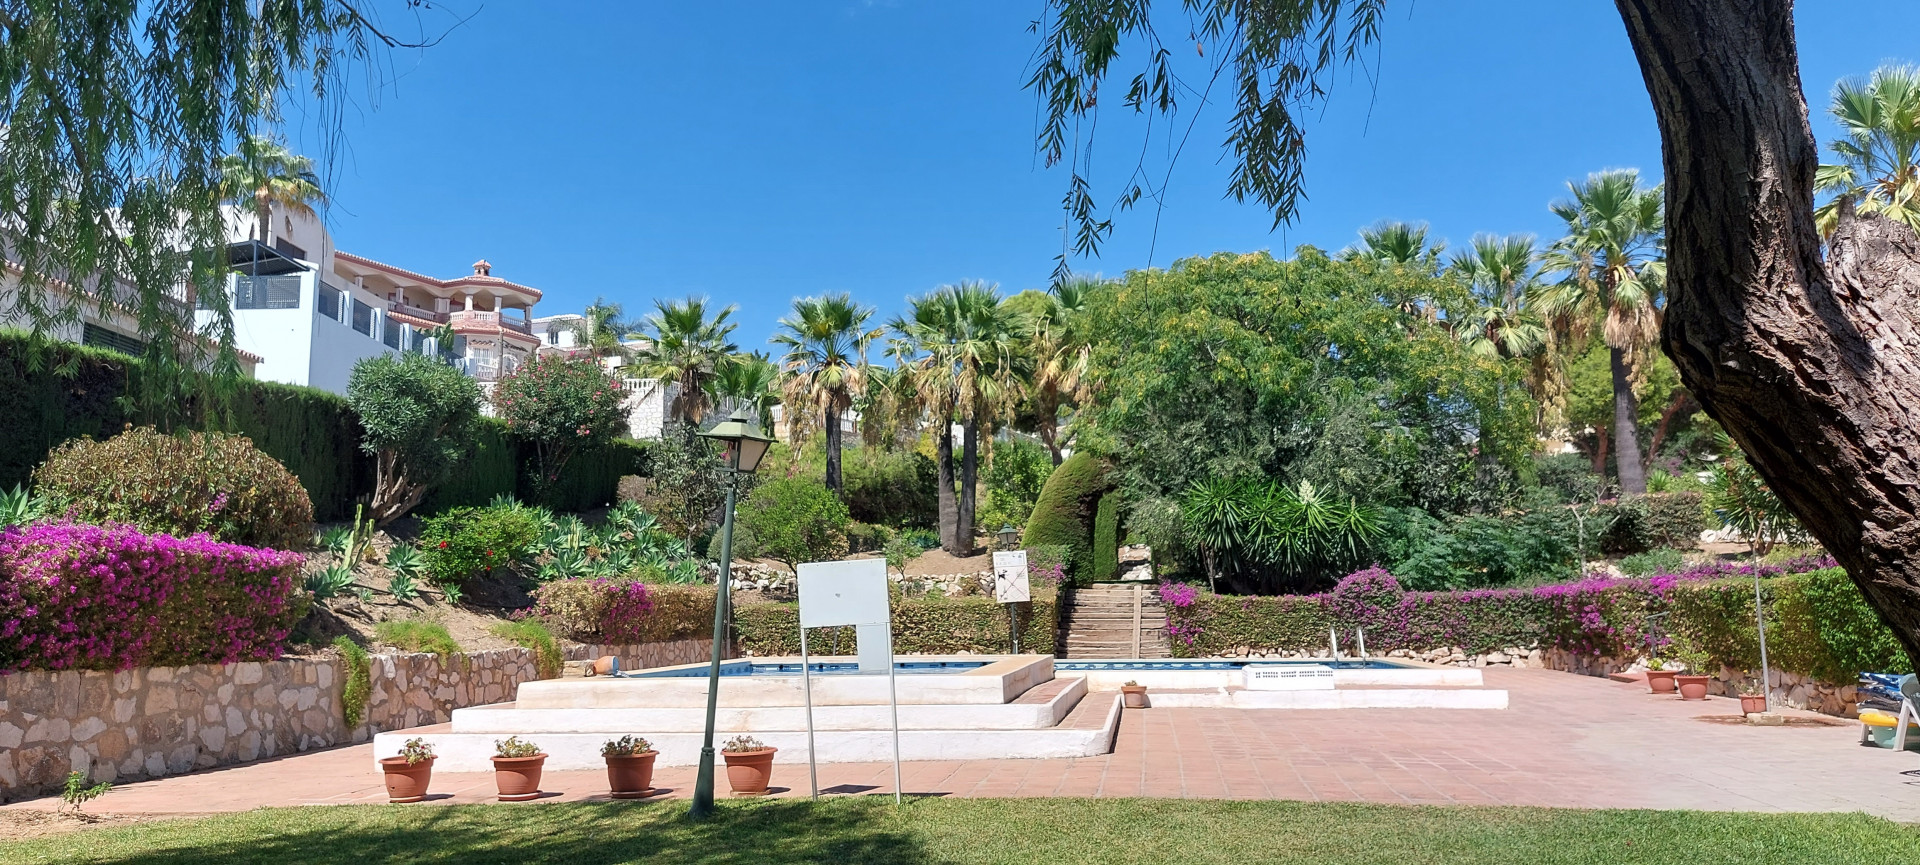 Townhouse for sale in Mijas 29